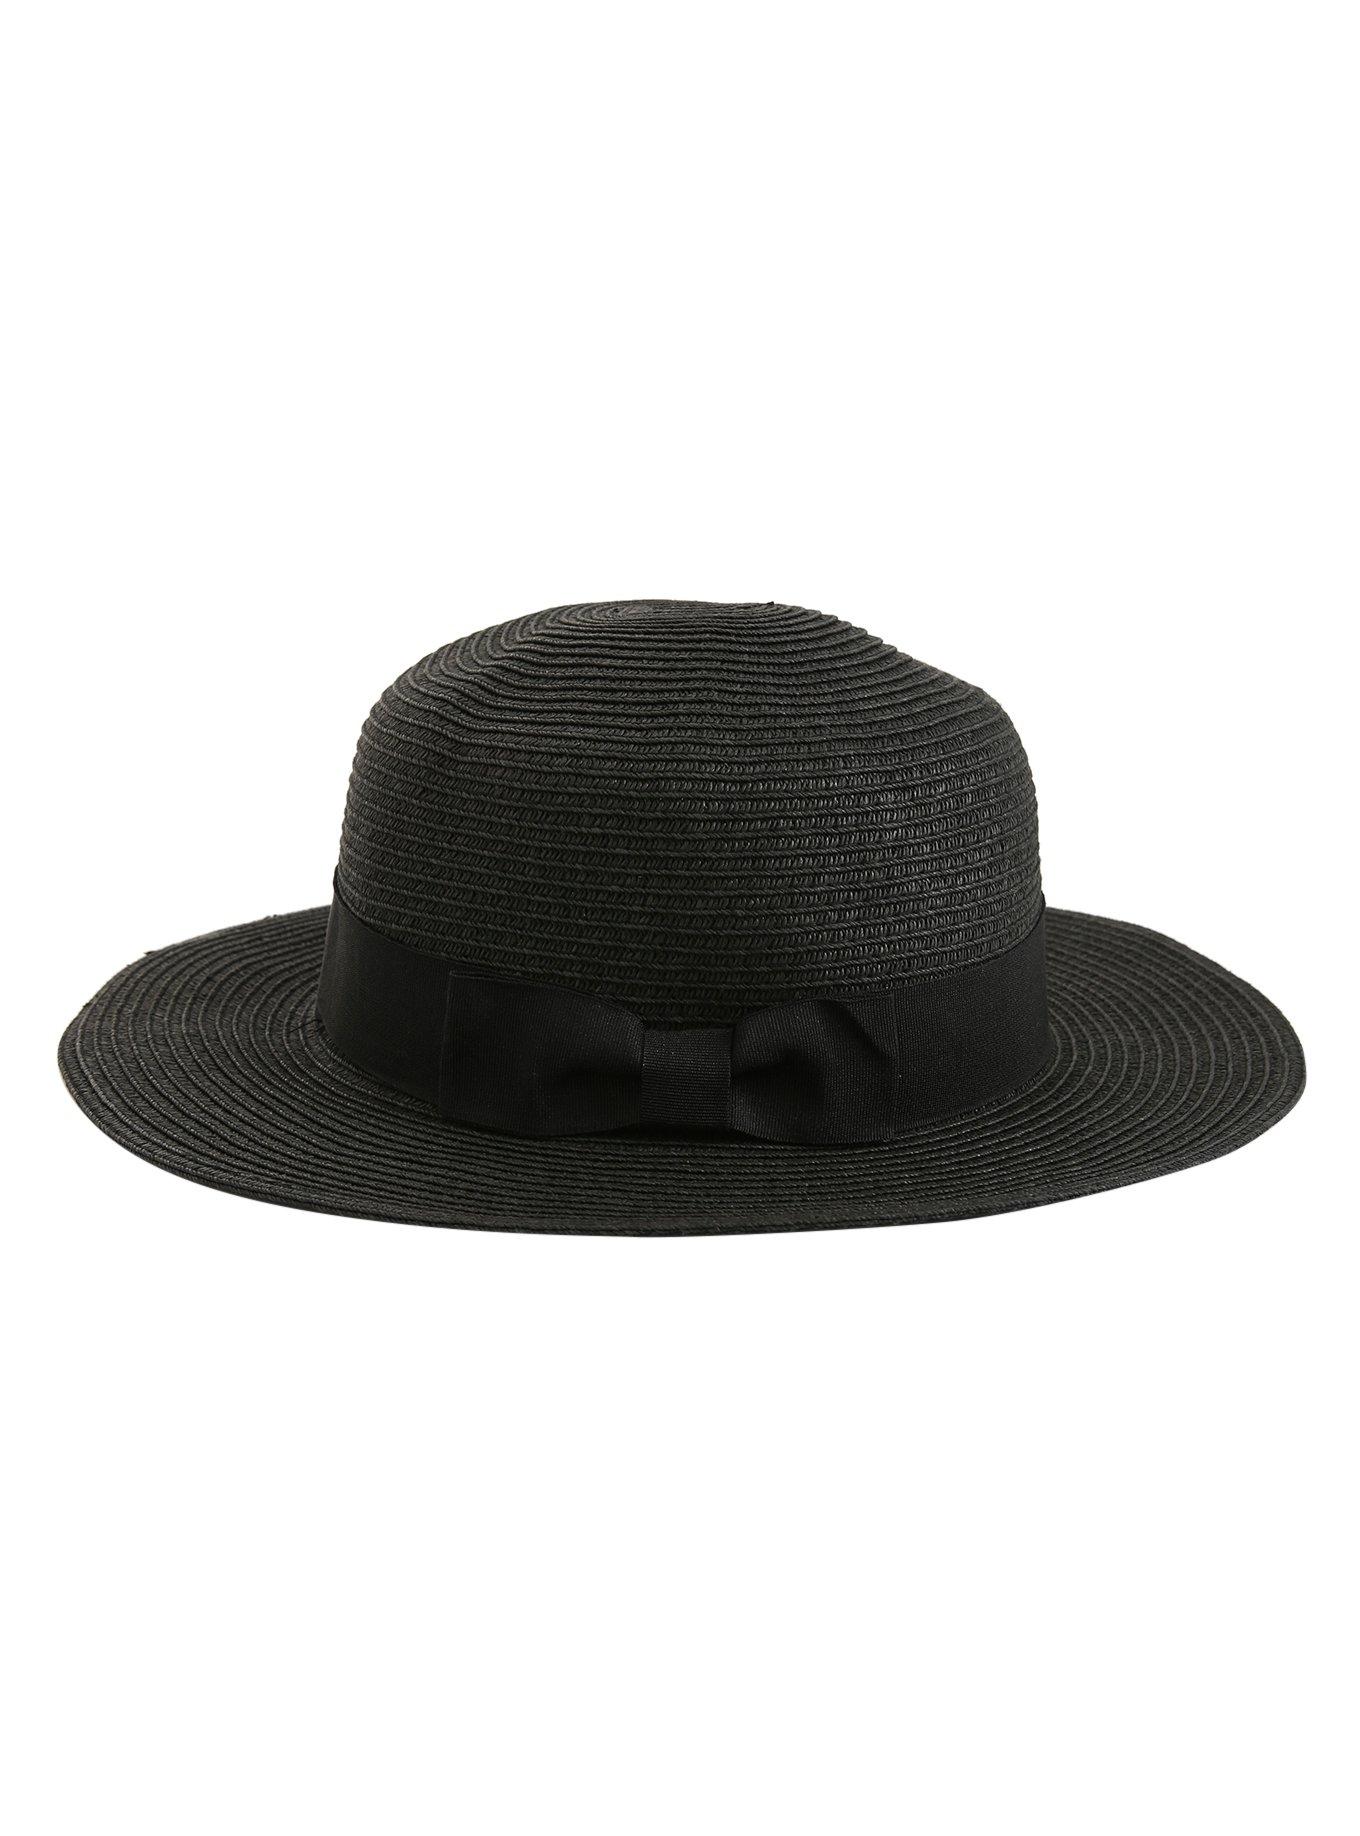 Black Straw Boater Hat With Bow, , alternate